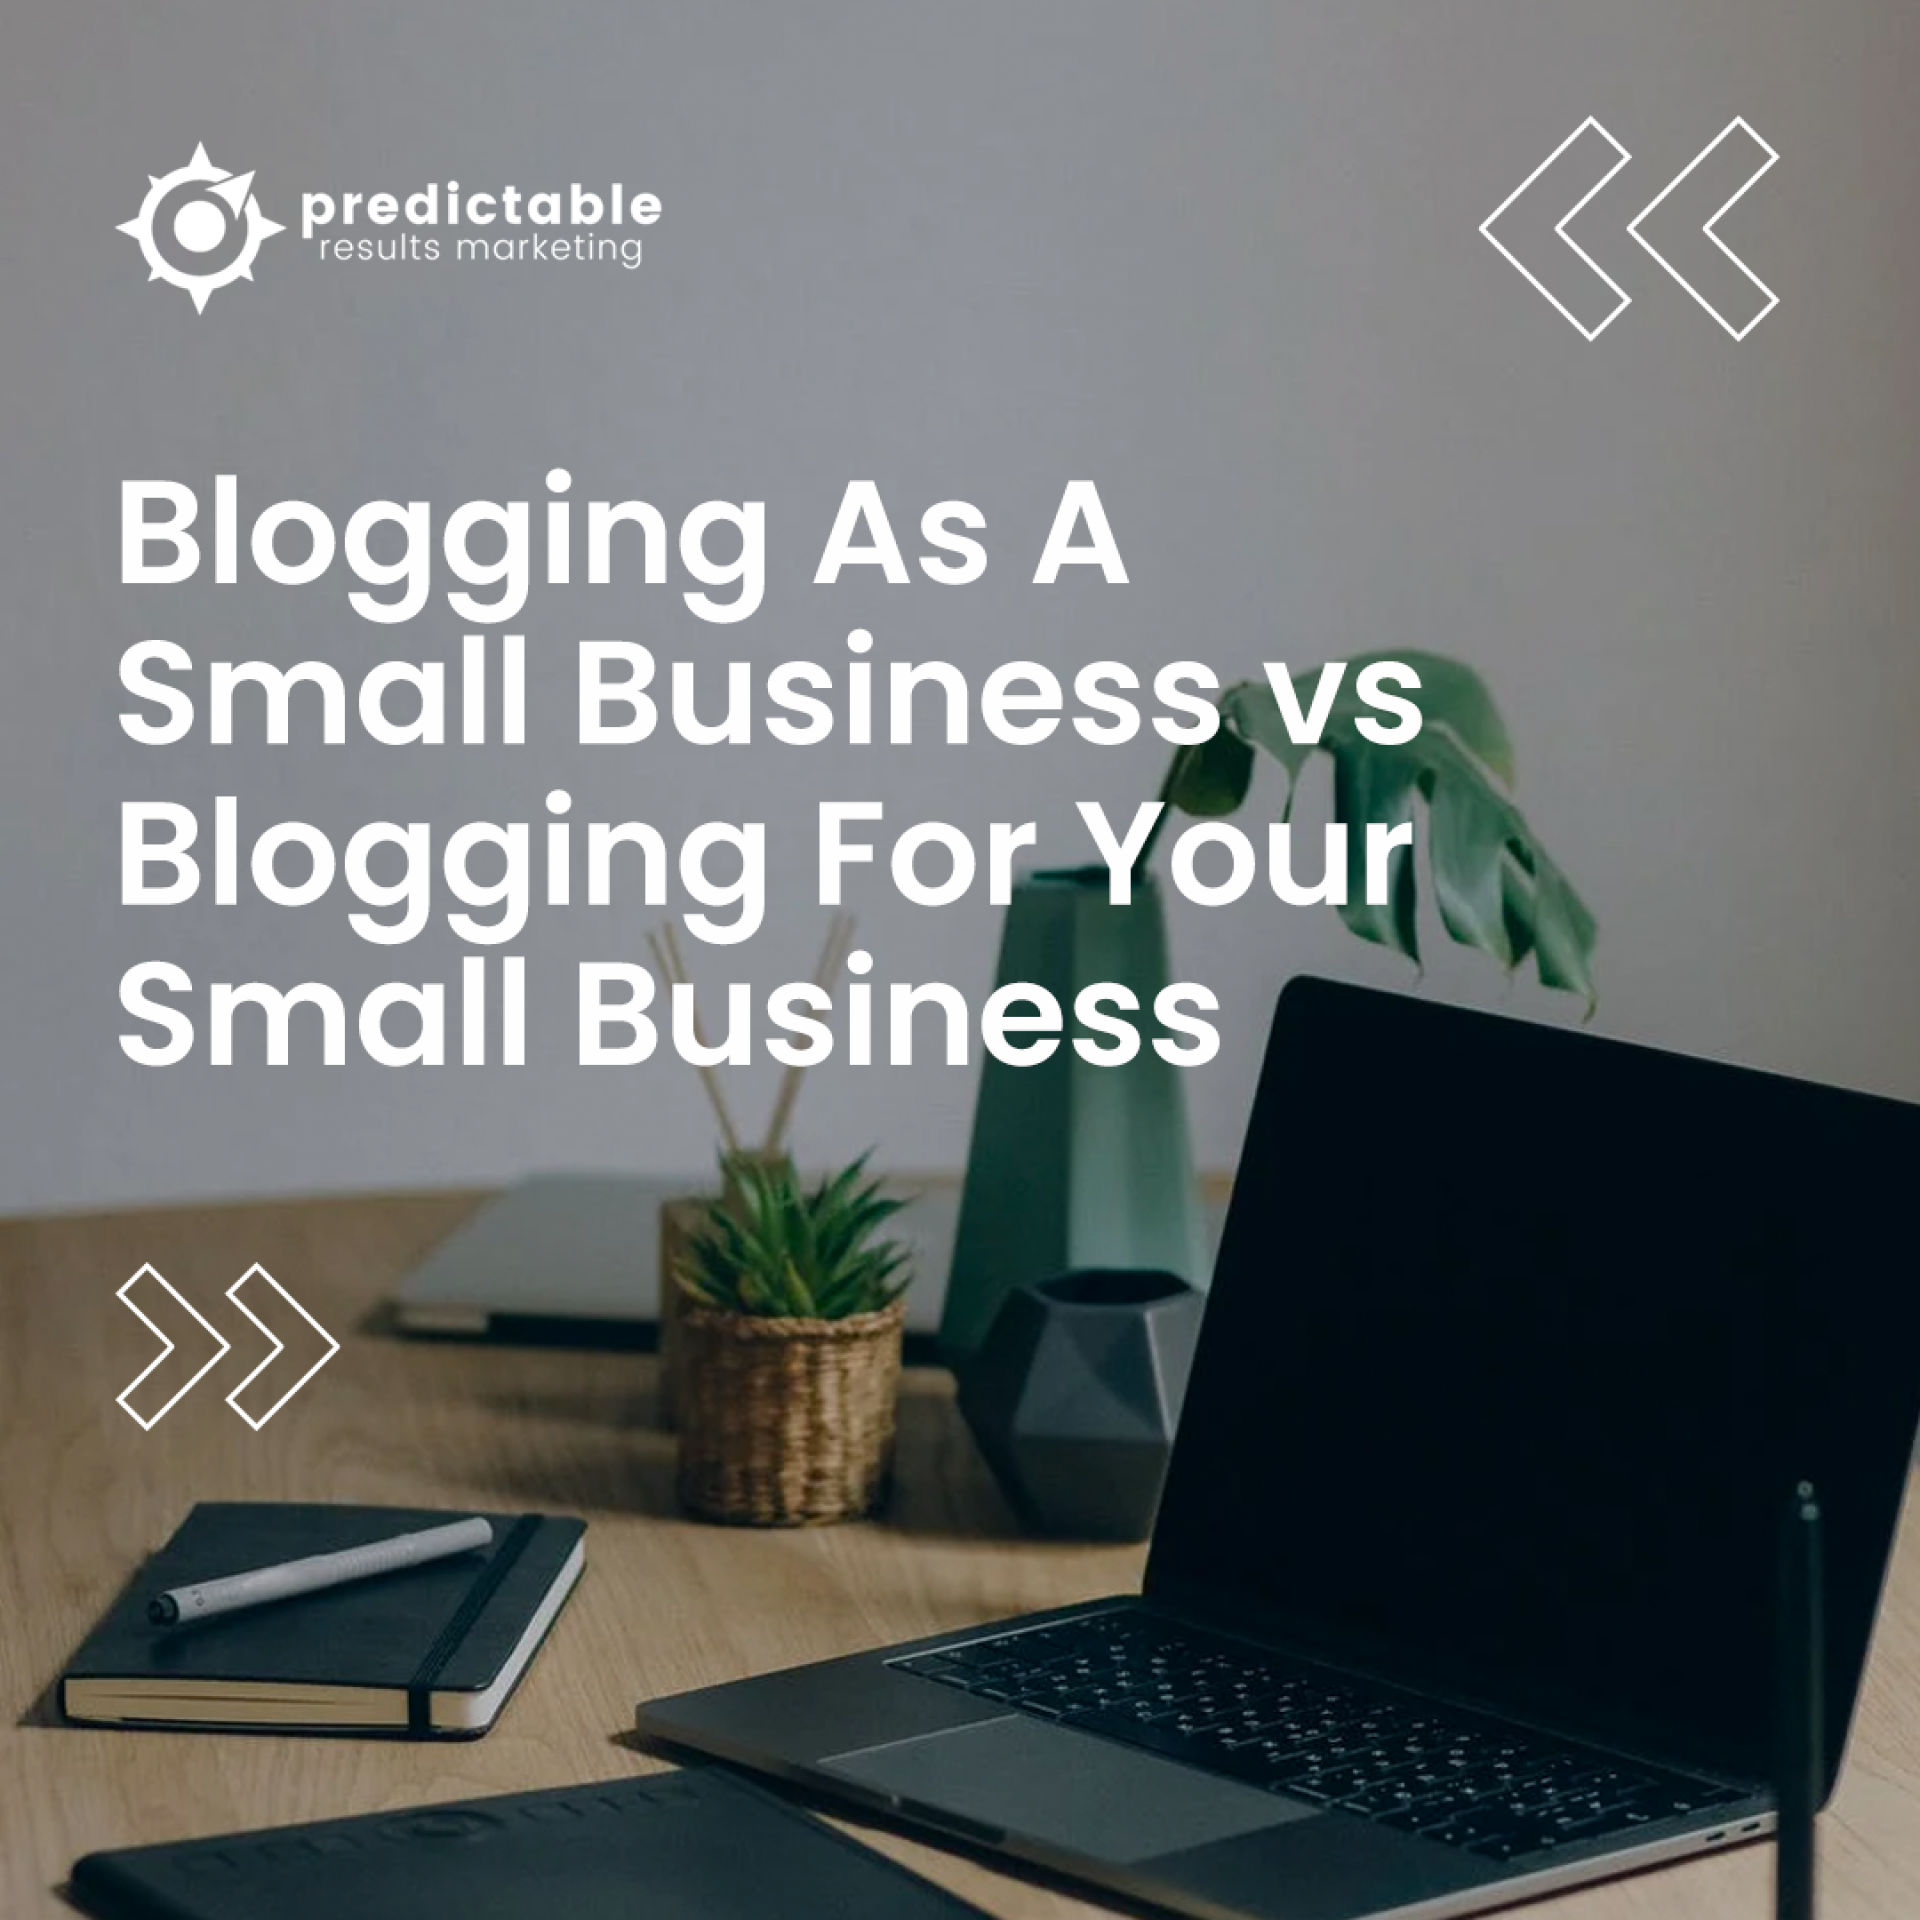 Blogging As A Small Business vs Blogging For Your Small Business